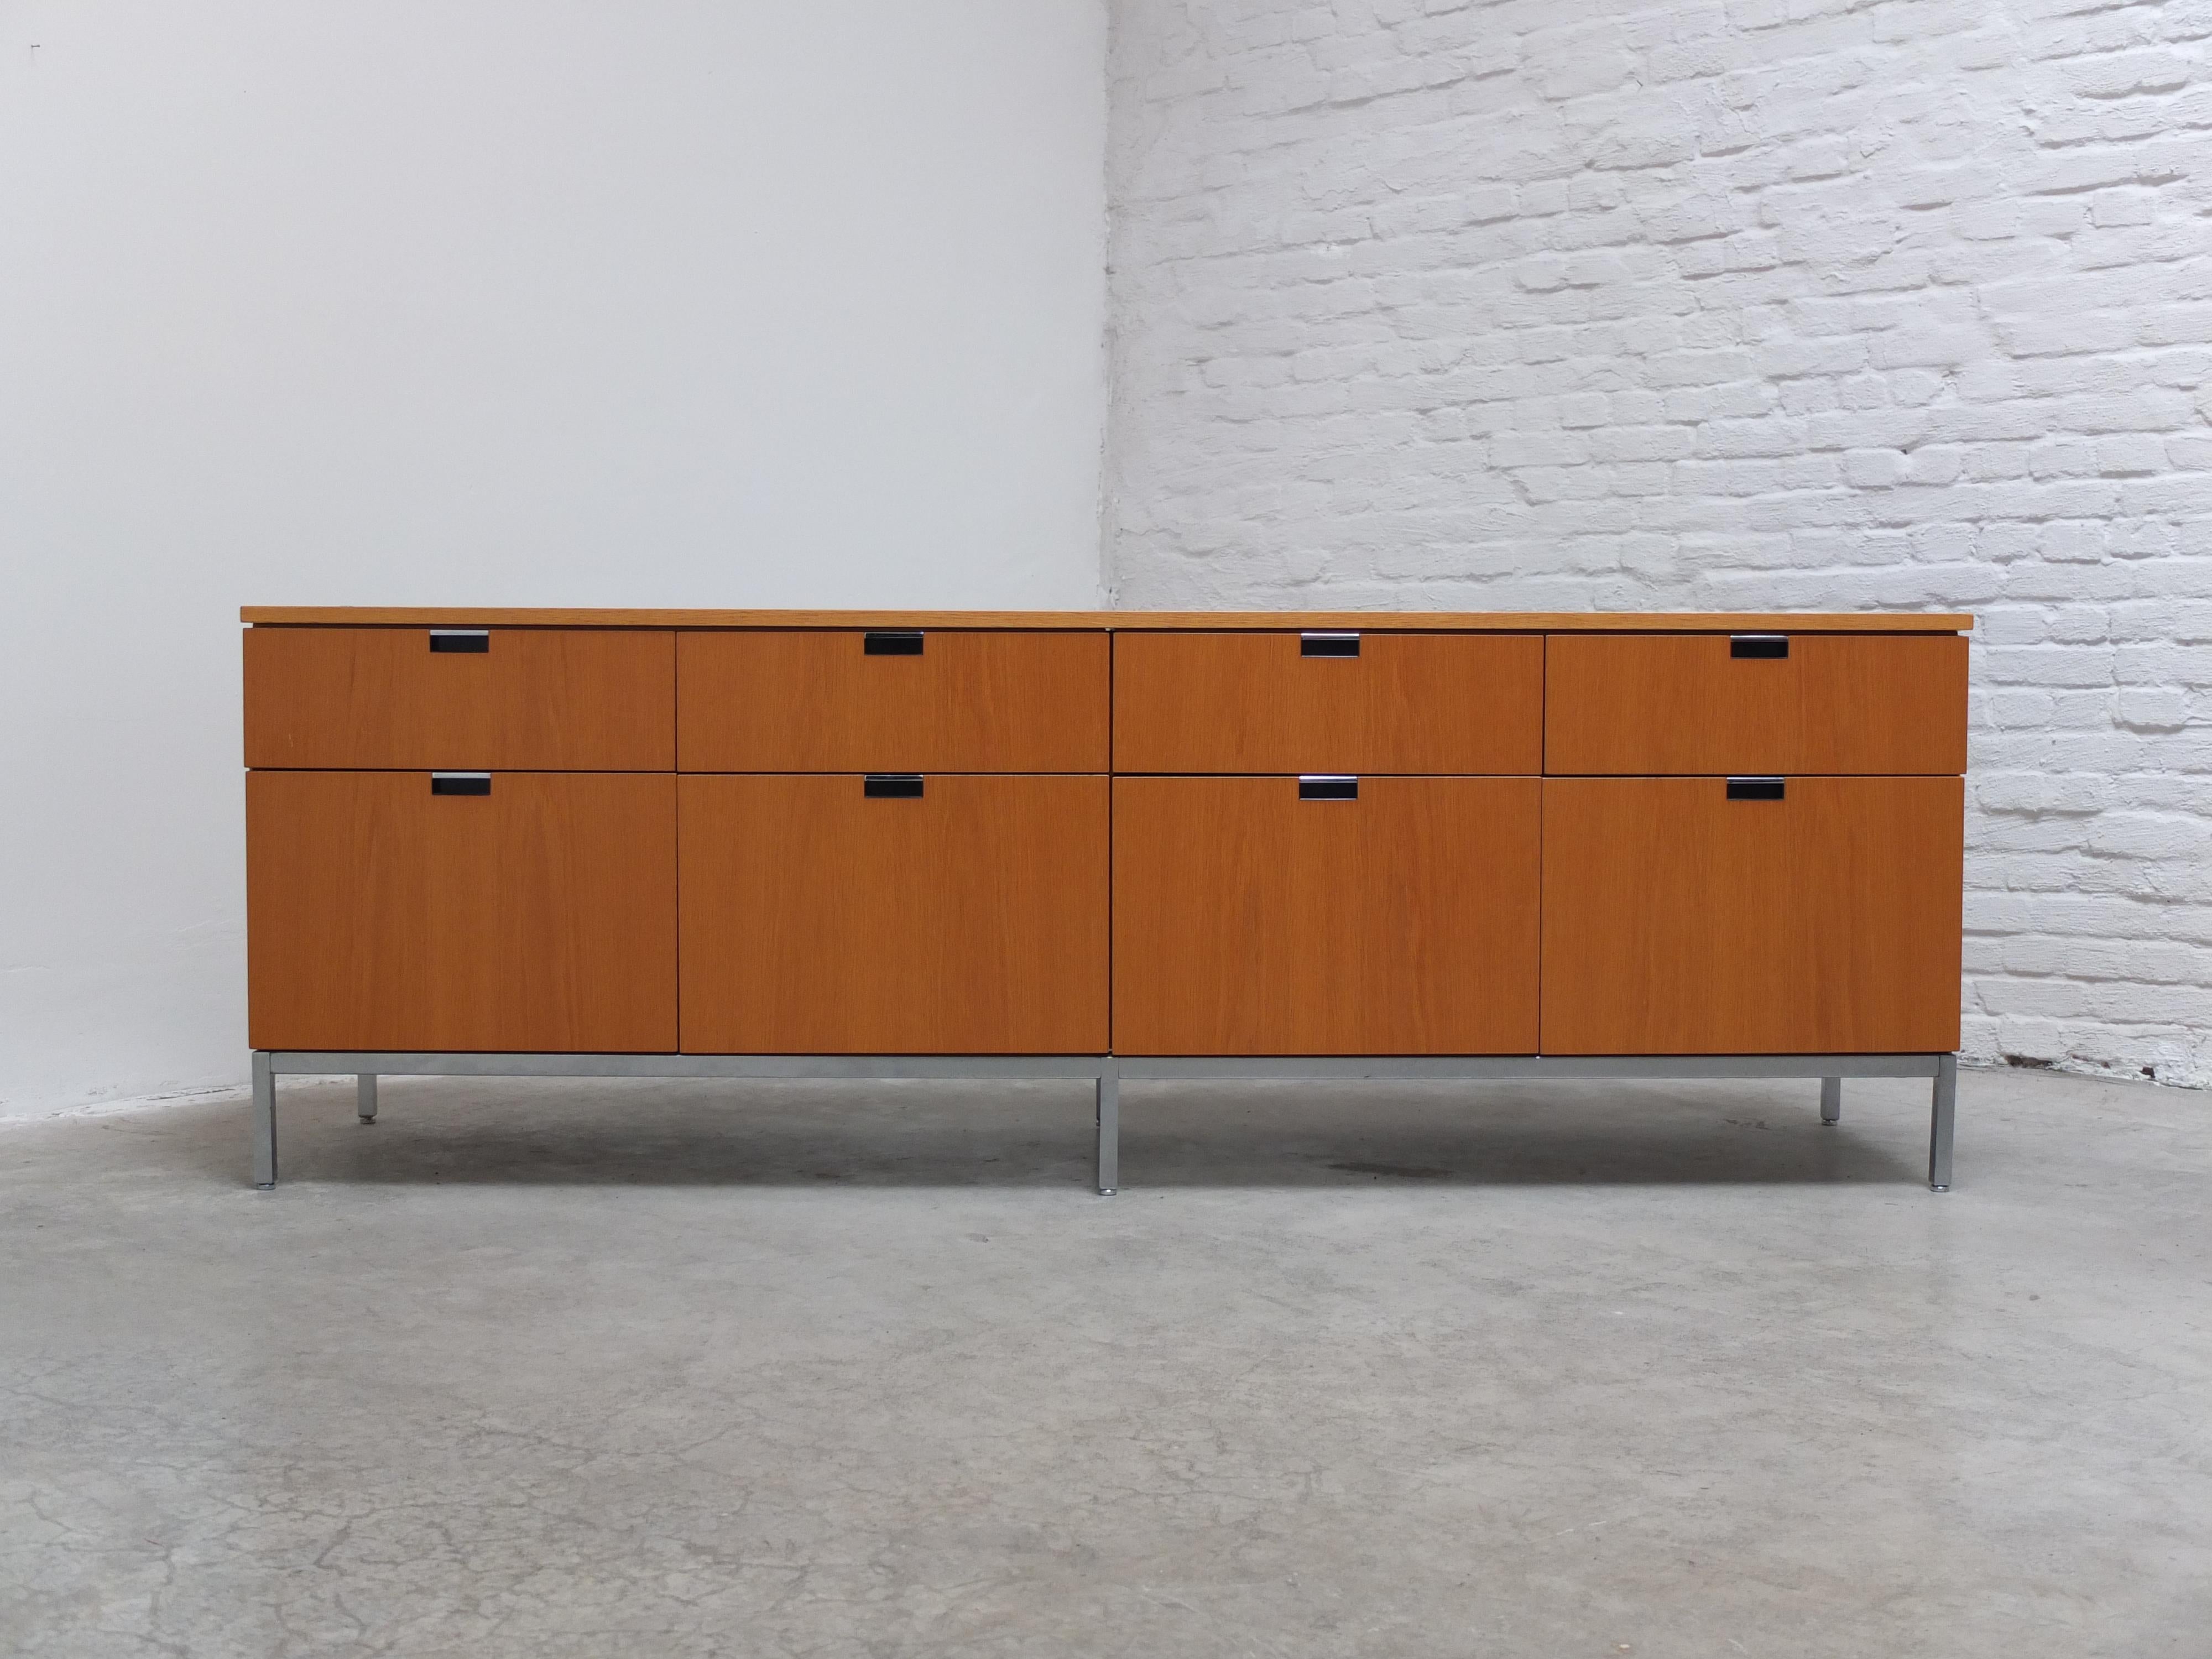 Stunning and ultra high-end sideboard designed by Florence Knoll Basset in 1961. This is a rare ‘2549M’ version with 8 drawers in total of which 4 pencil drawers and 4 large file cabinets. This configuration is rarely offered and is also the most